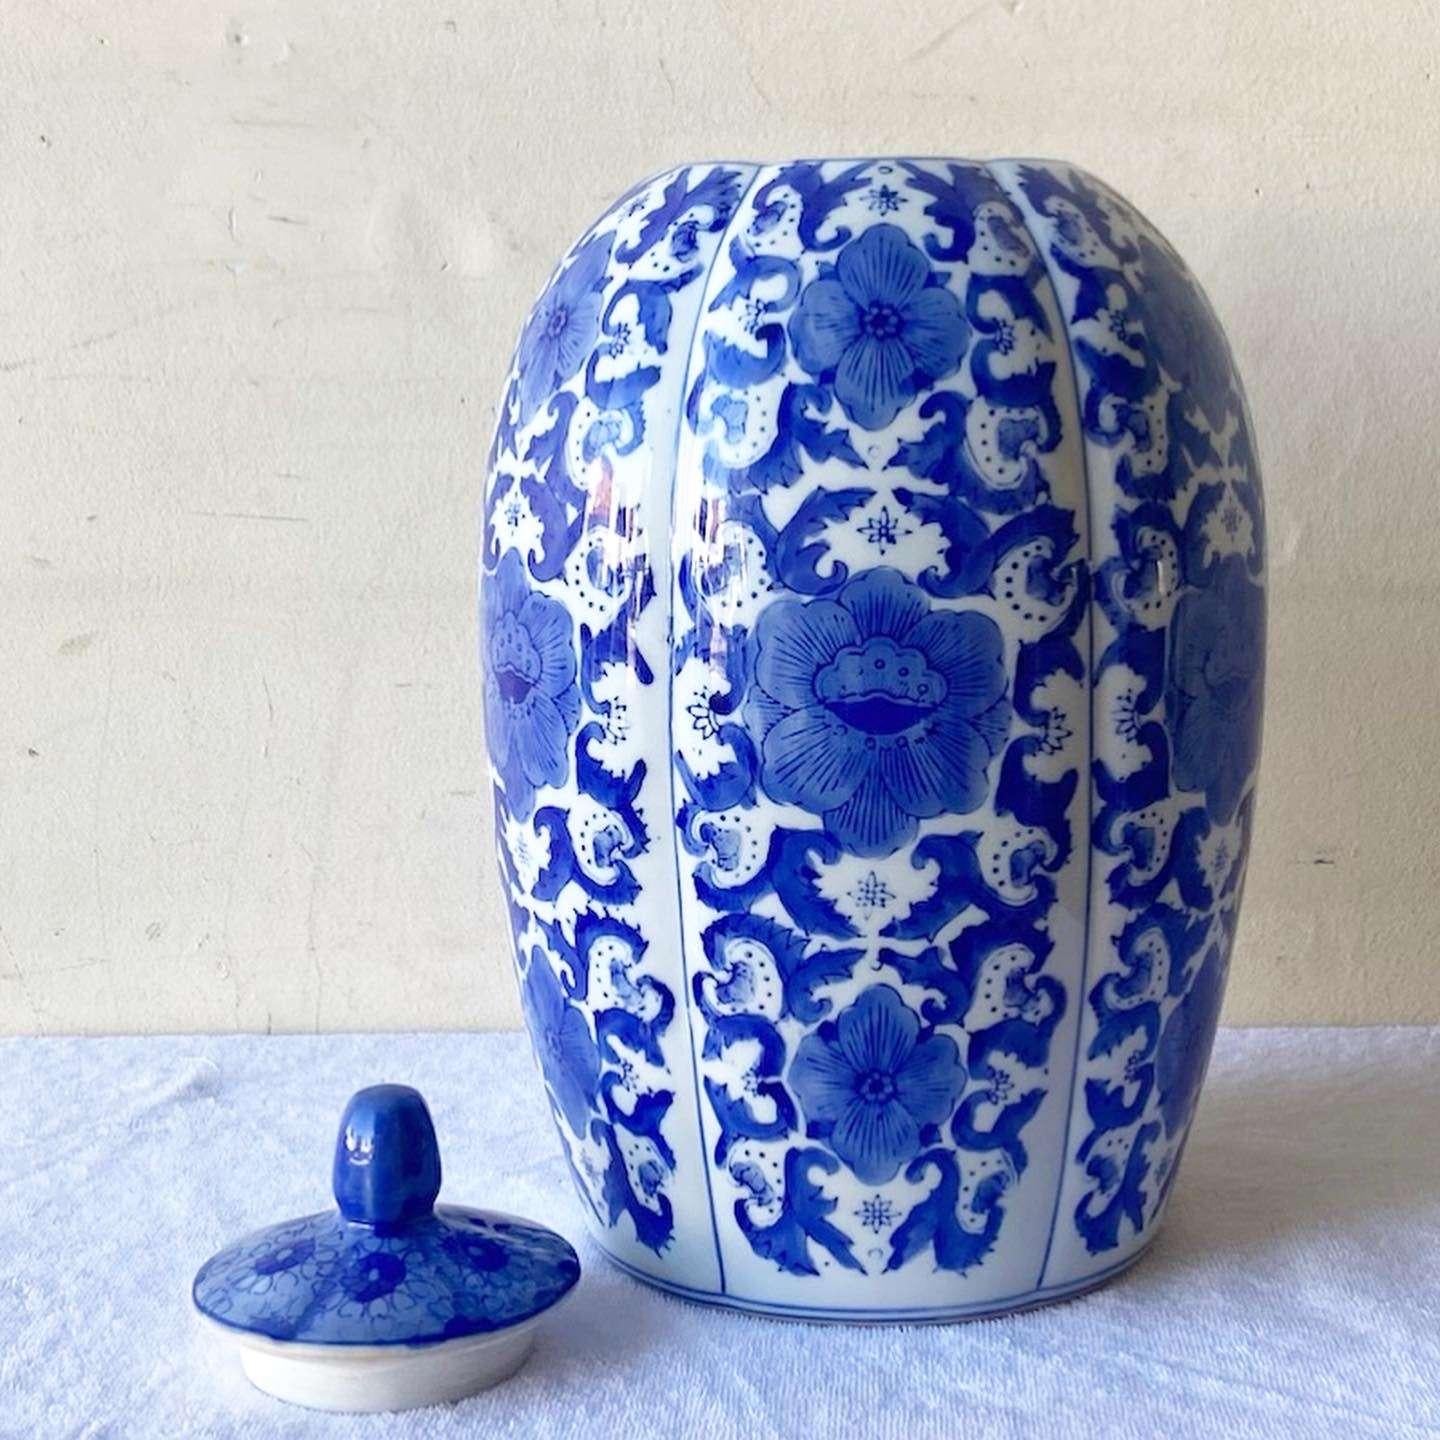 Exceptional vintage Chinese blue and white ginger jar. Features an ornate hand painted floral design throughout the jar.
